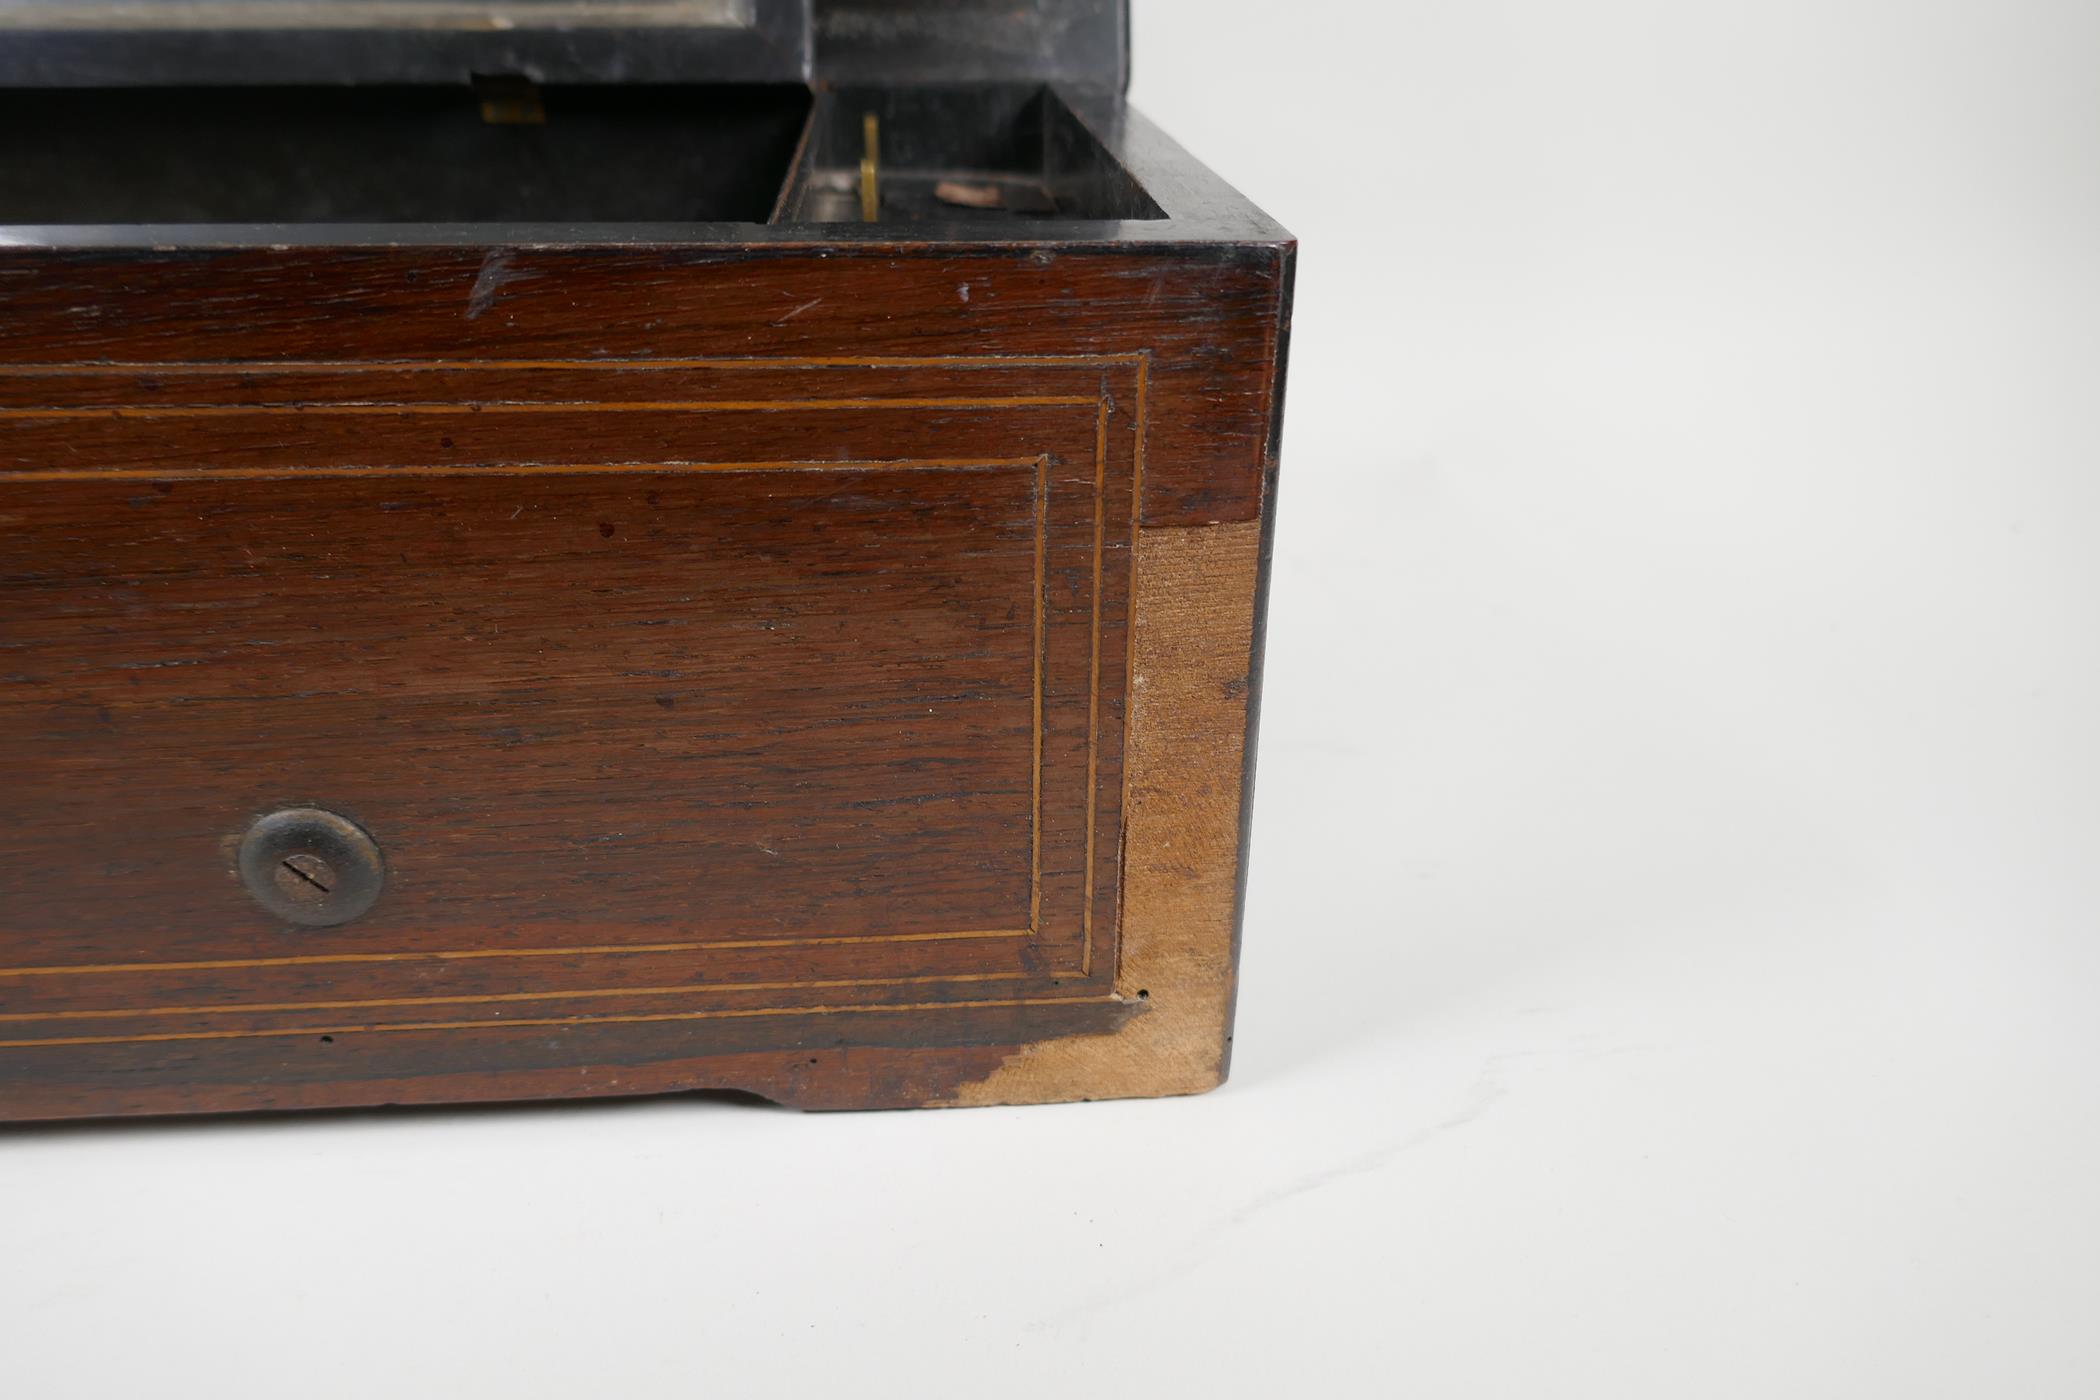 A C19th Swiss rosewood veneered music box with cross banded inlay, playing 6 aires, lacks melody - Image 5 of 6